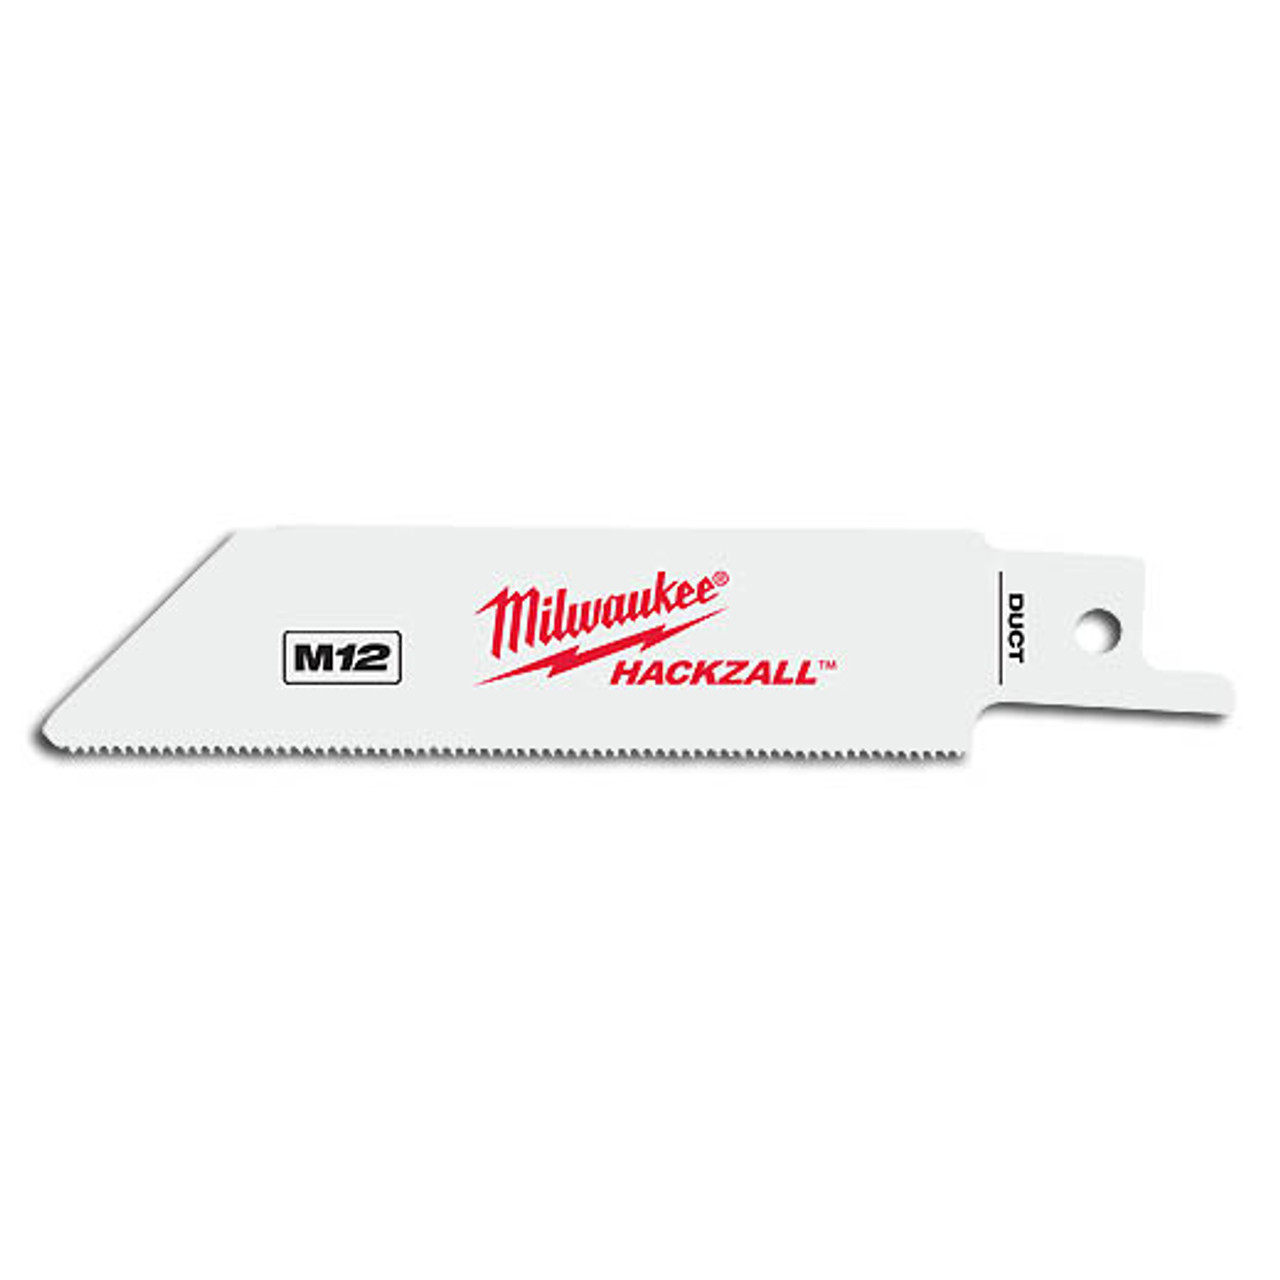 Milwaukee Hackzall Blades Available At 2DayBlade.com